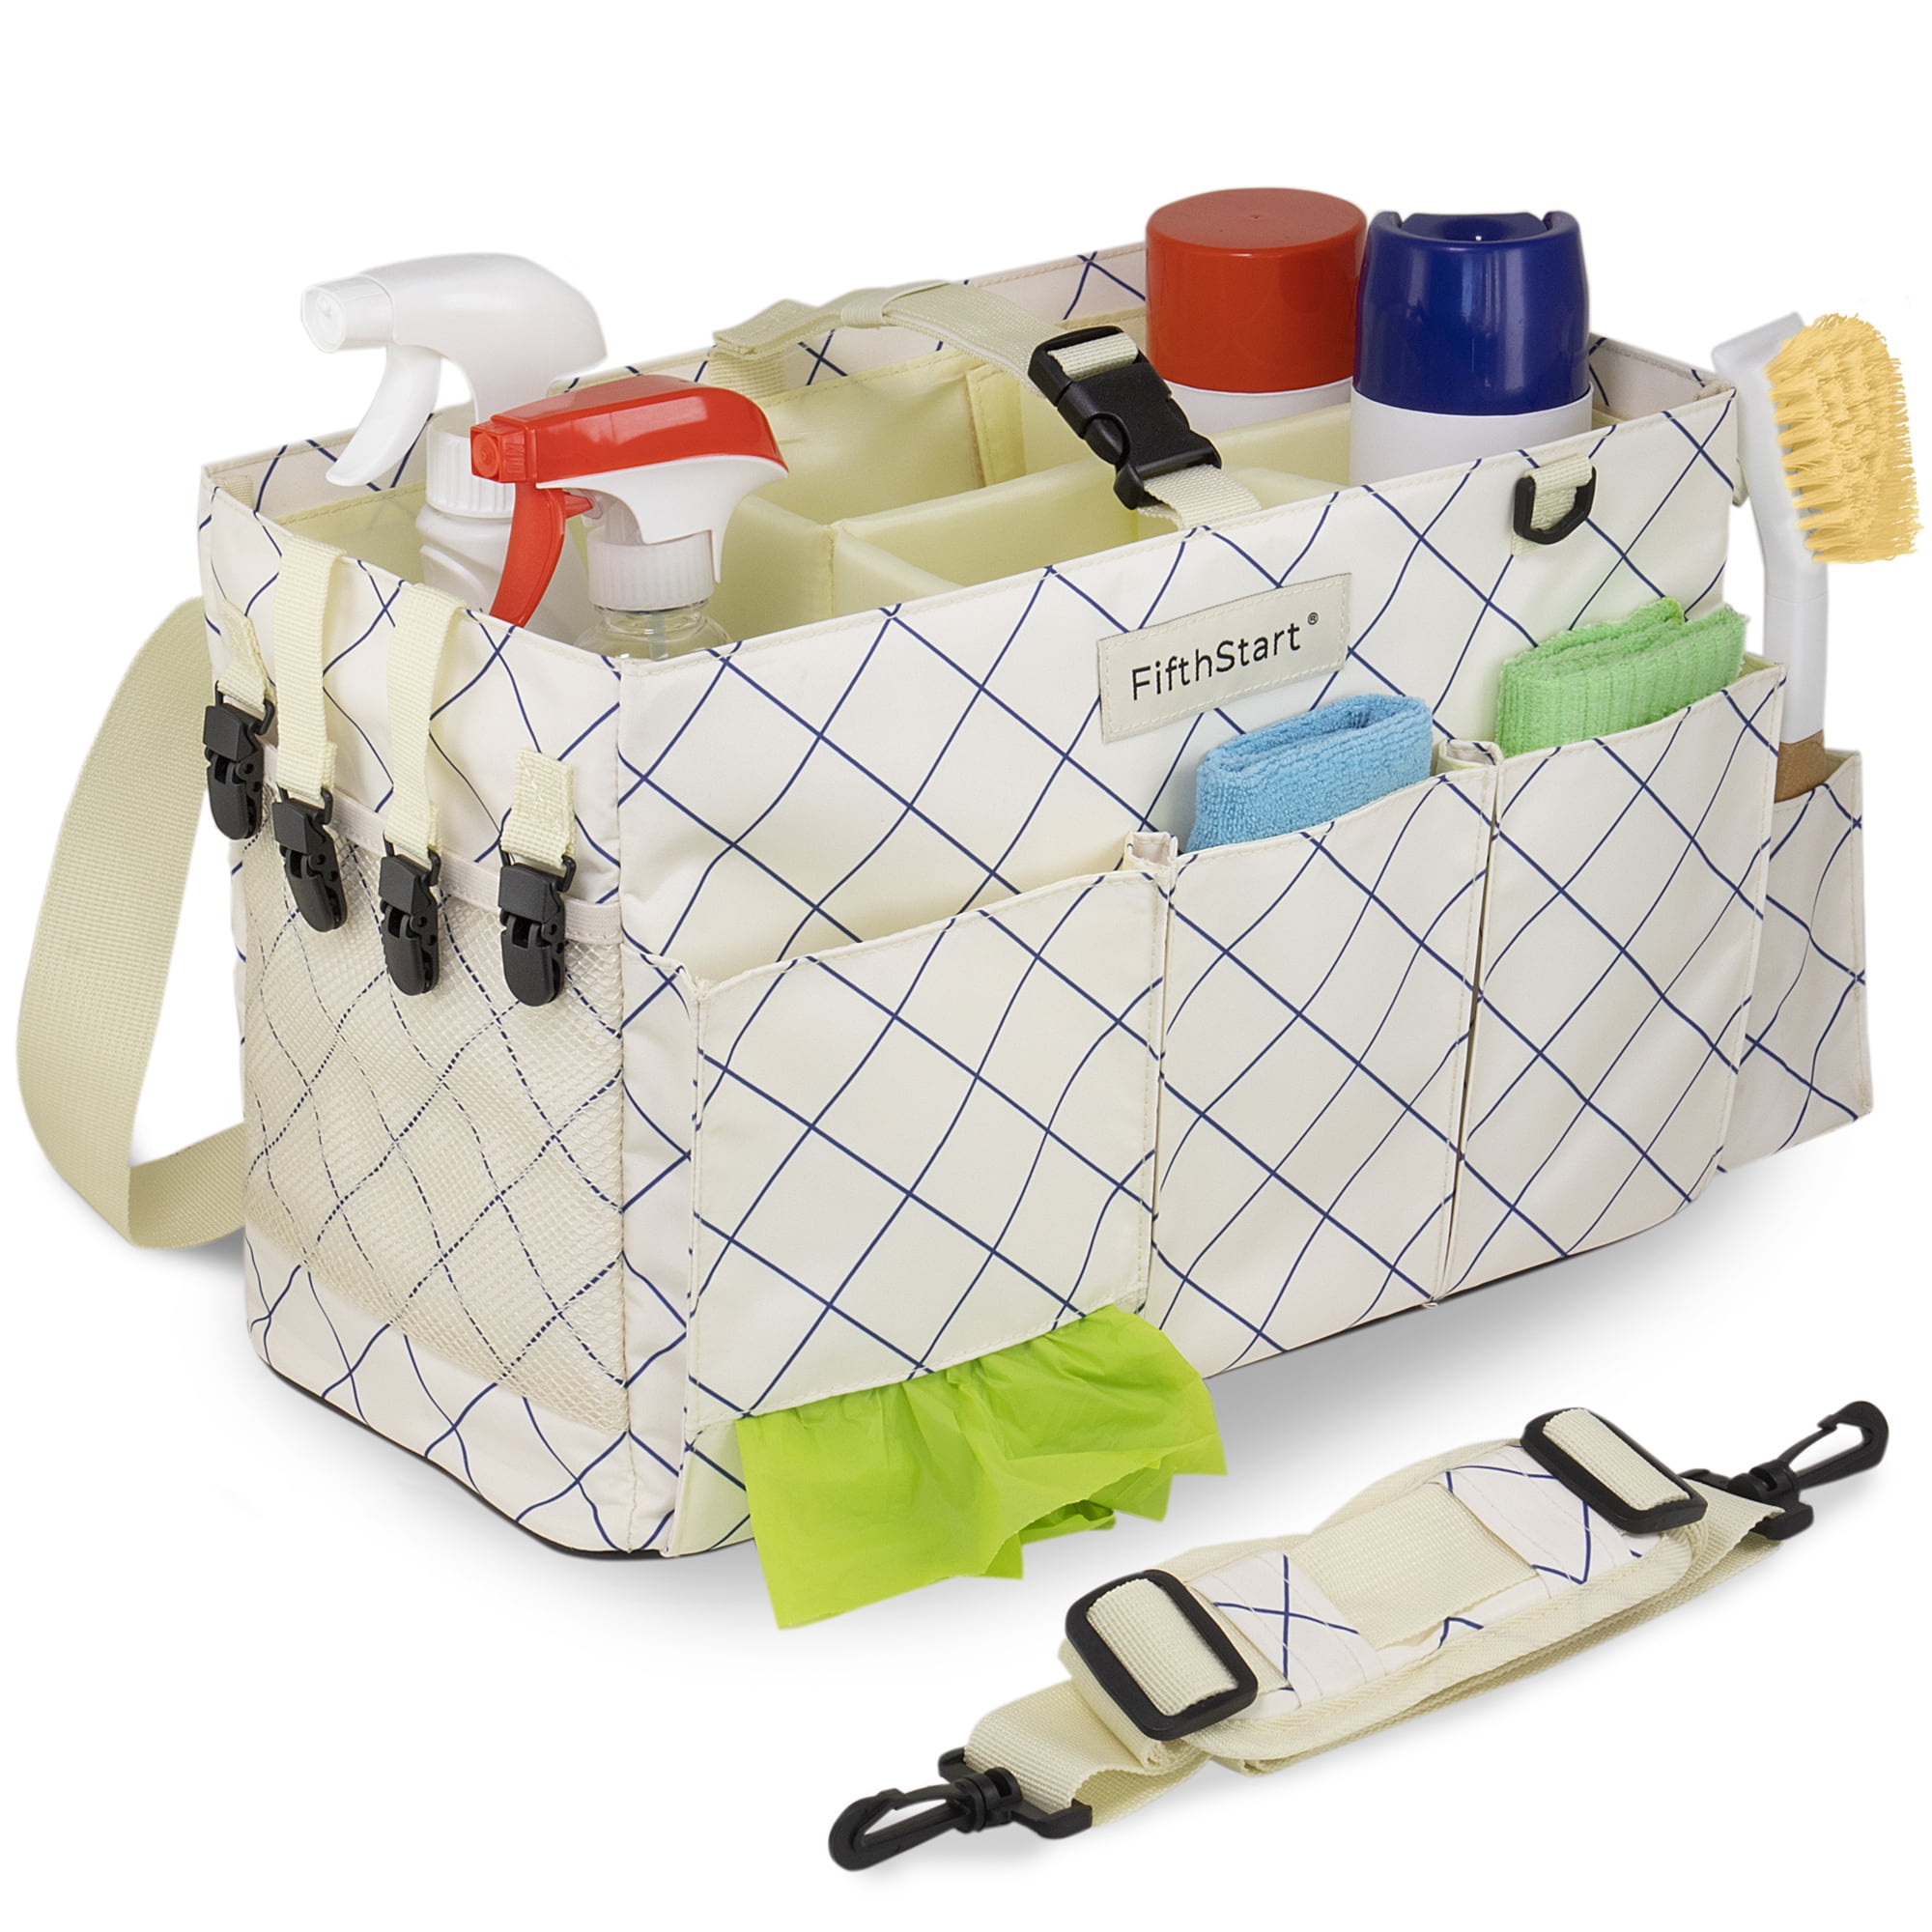 PLASTIC CARRY CADDY CLEANING WITH HANDLE TIDY UP STRONG LARGE